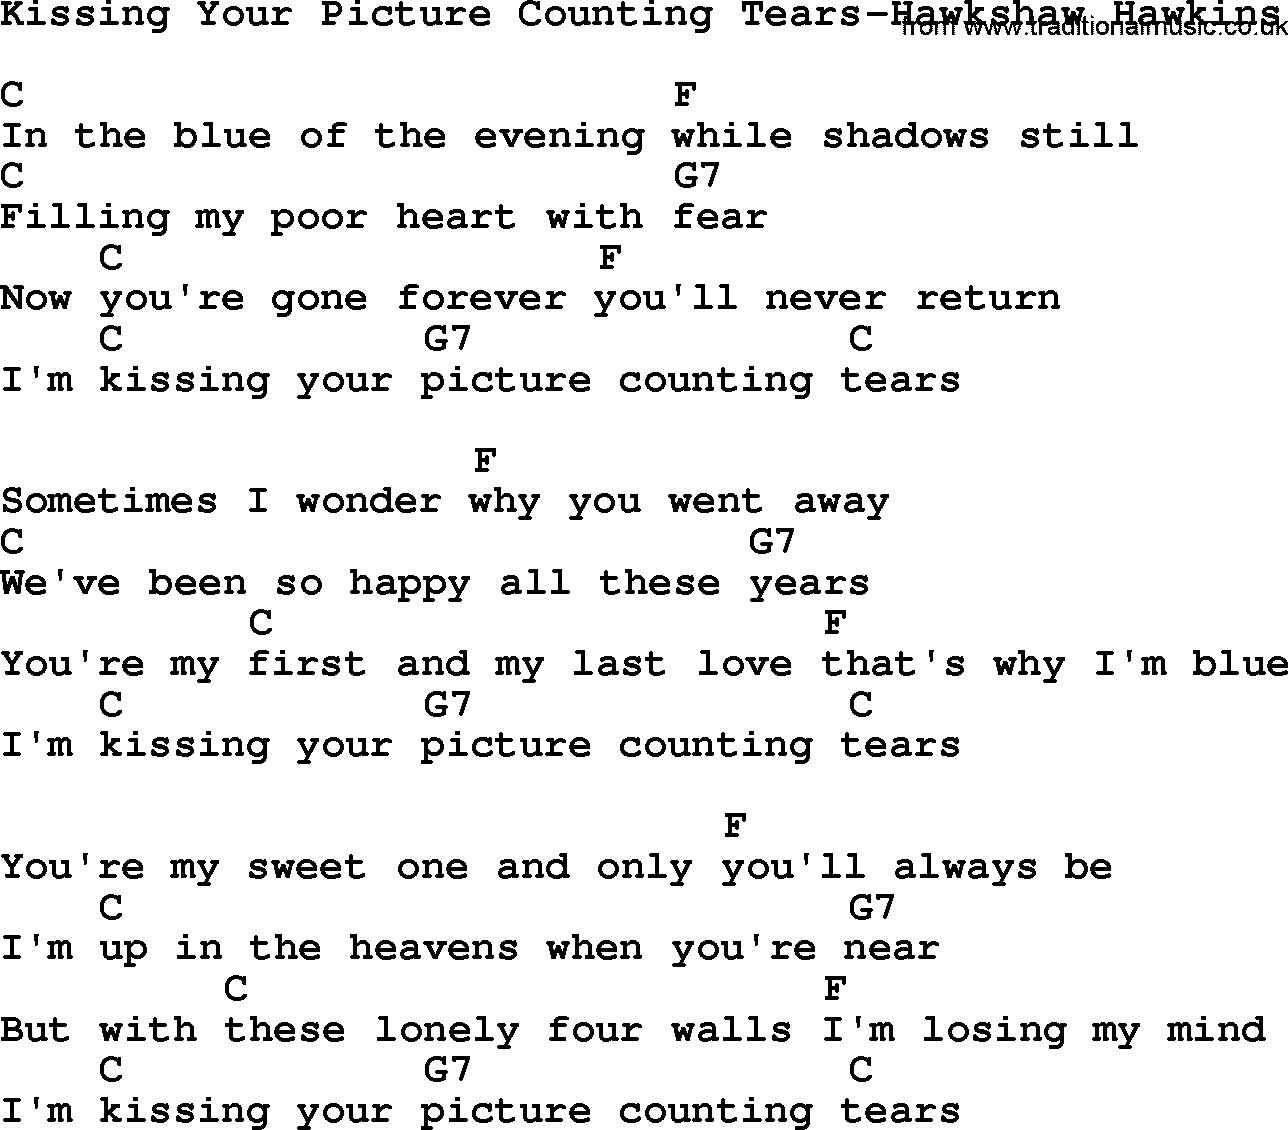 Country music song: Kissing Your Picture Counting Tears-Hawkshaw Hawkins lyrics and chords